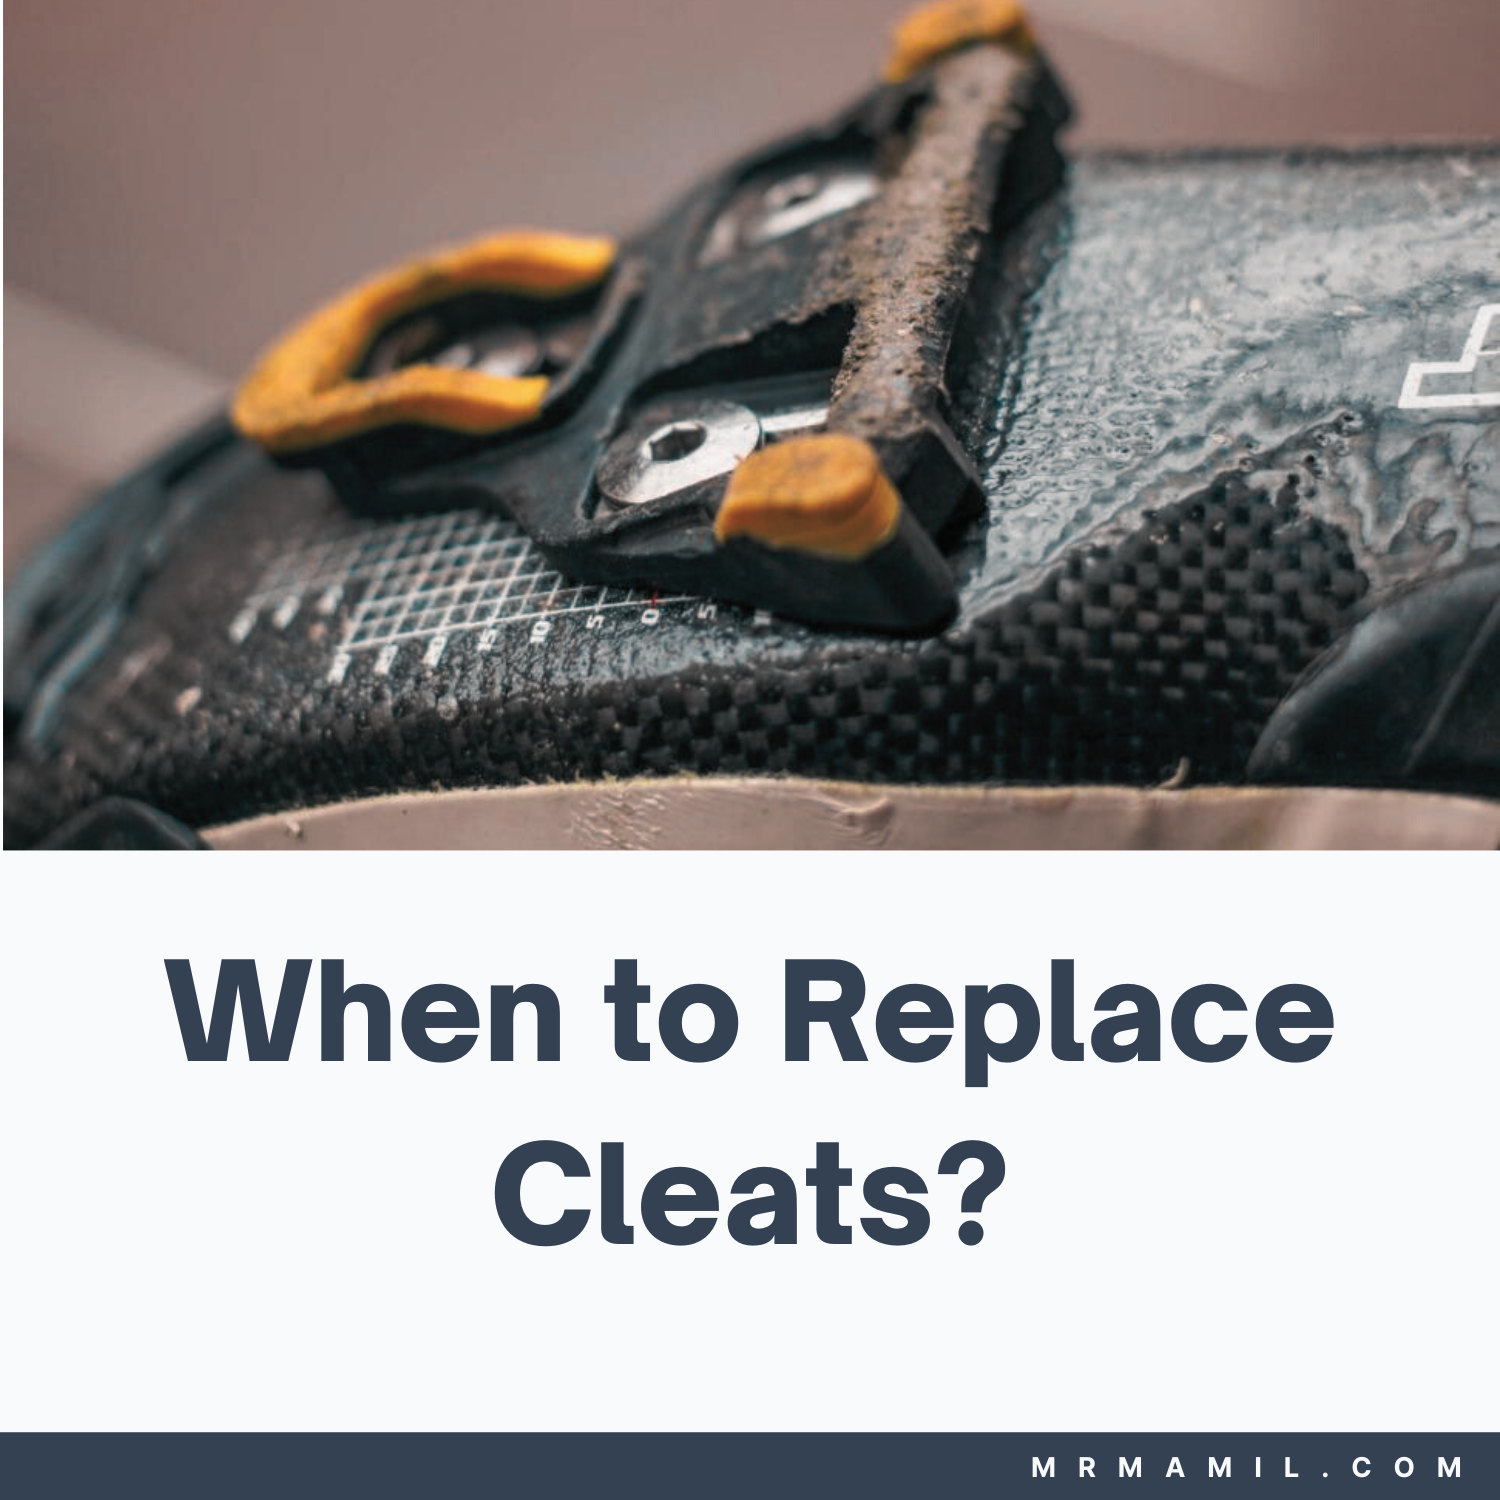 When to Replace Worn Out Cycling Cleats